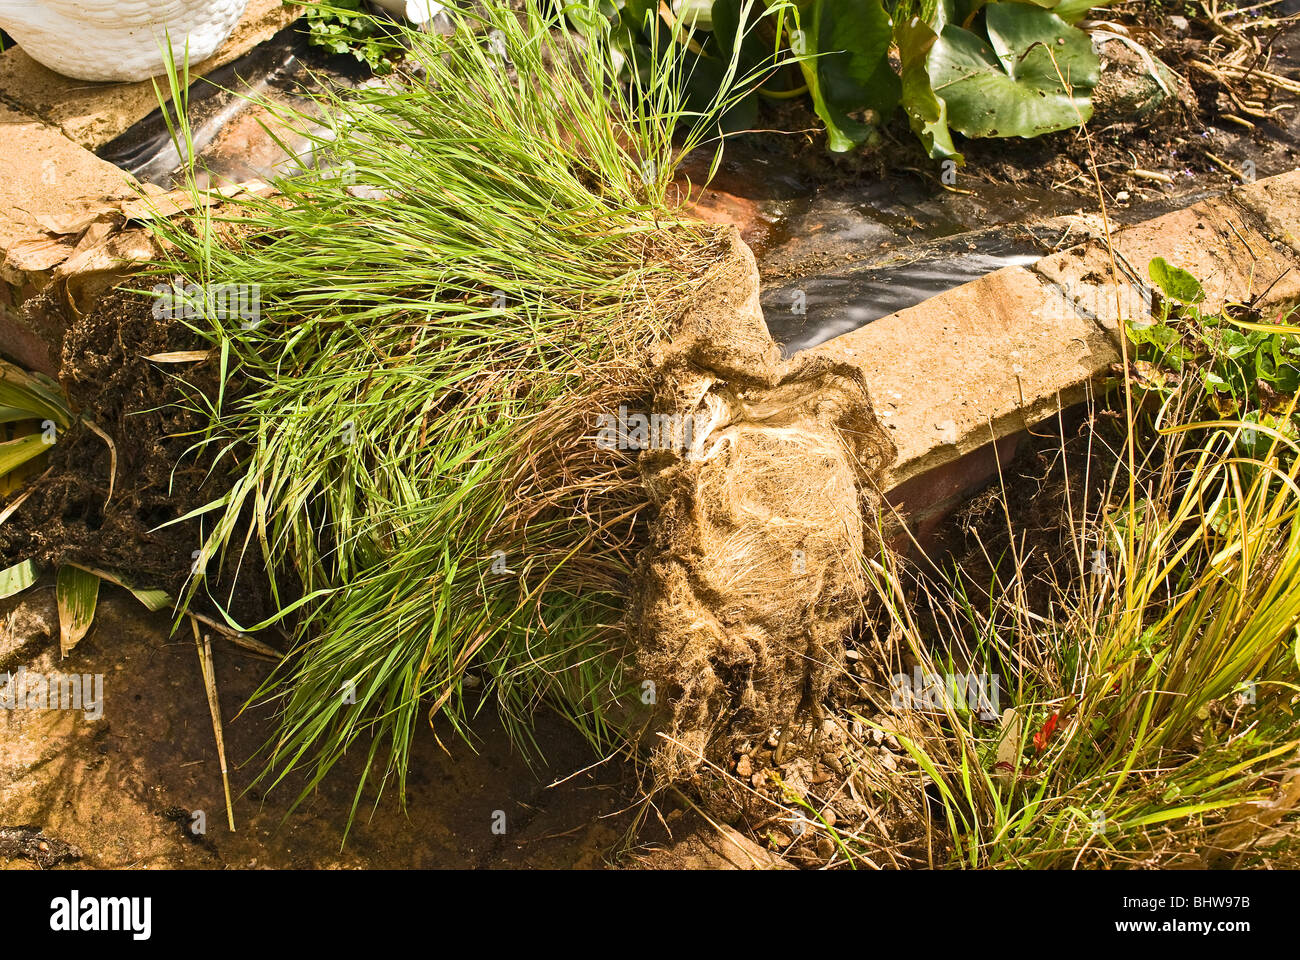 Weeds matted roots overgrown water plants and detritus removed from garden pond during cleansing Stock Photo